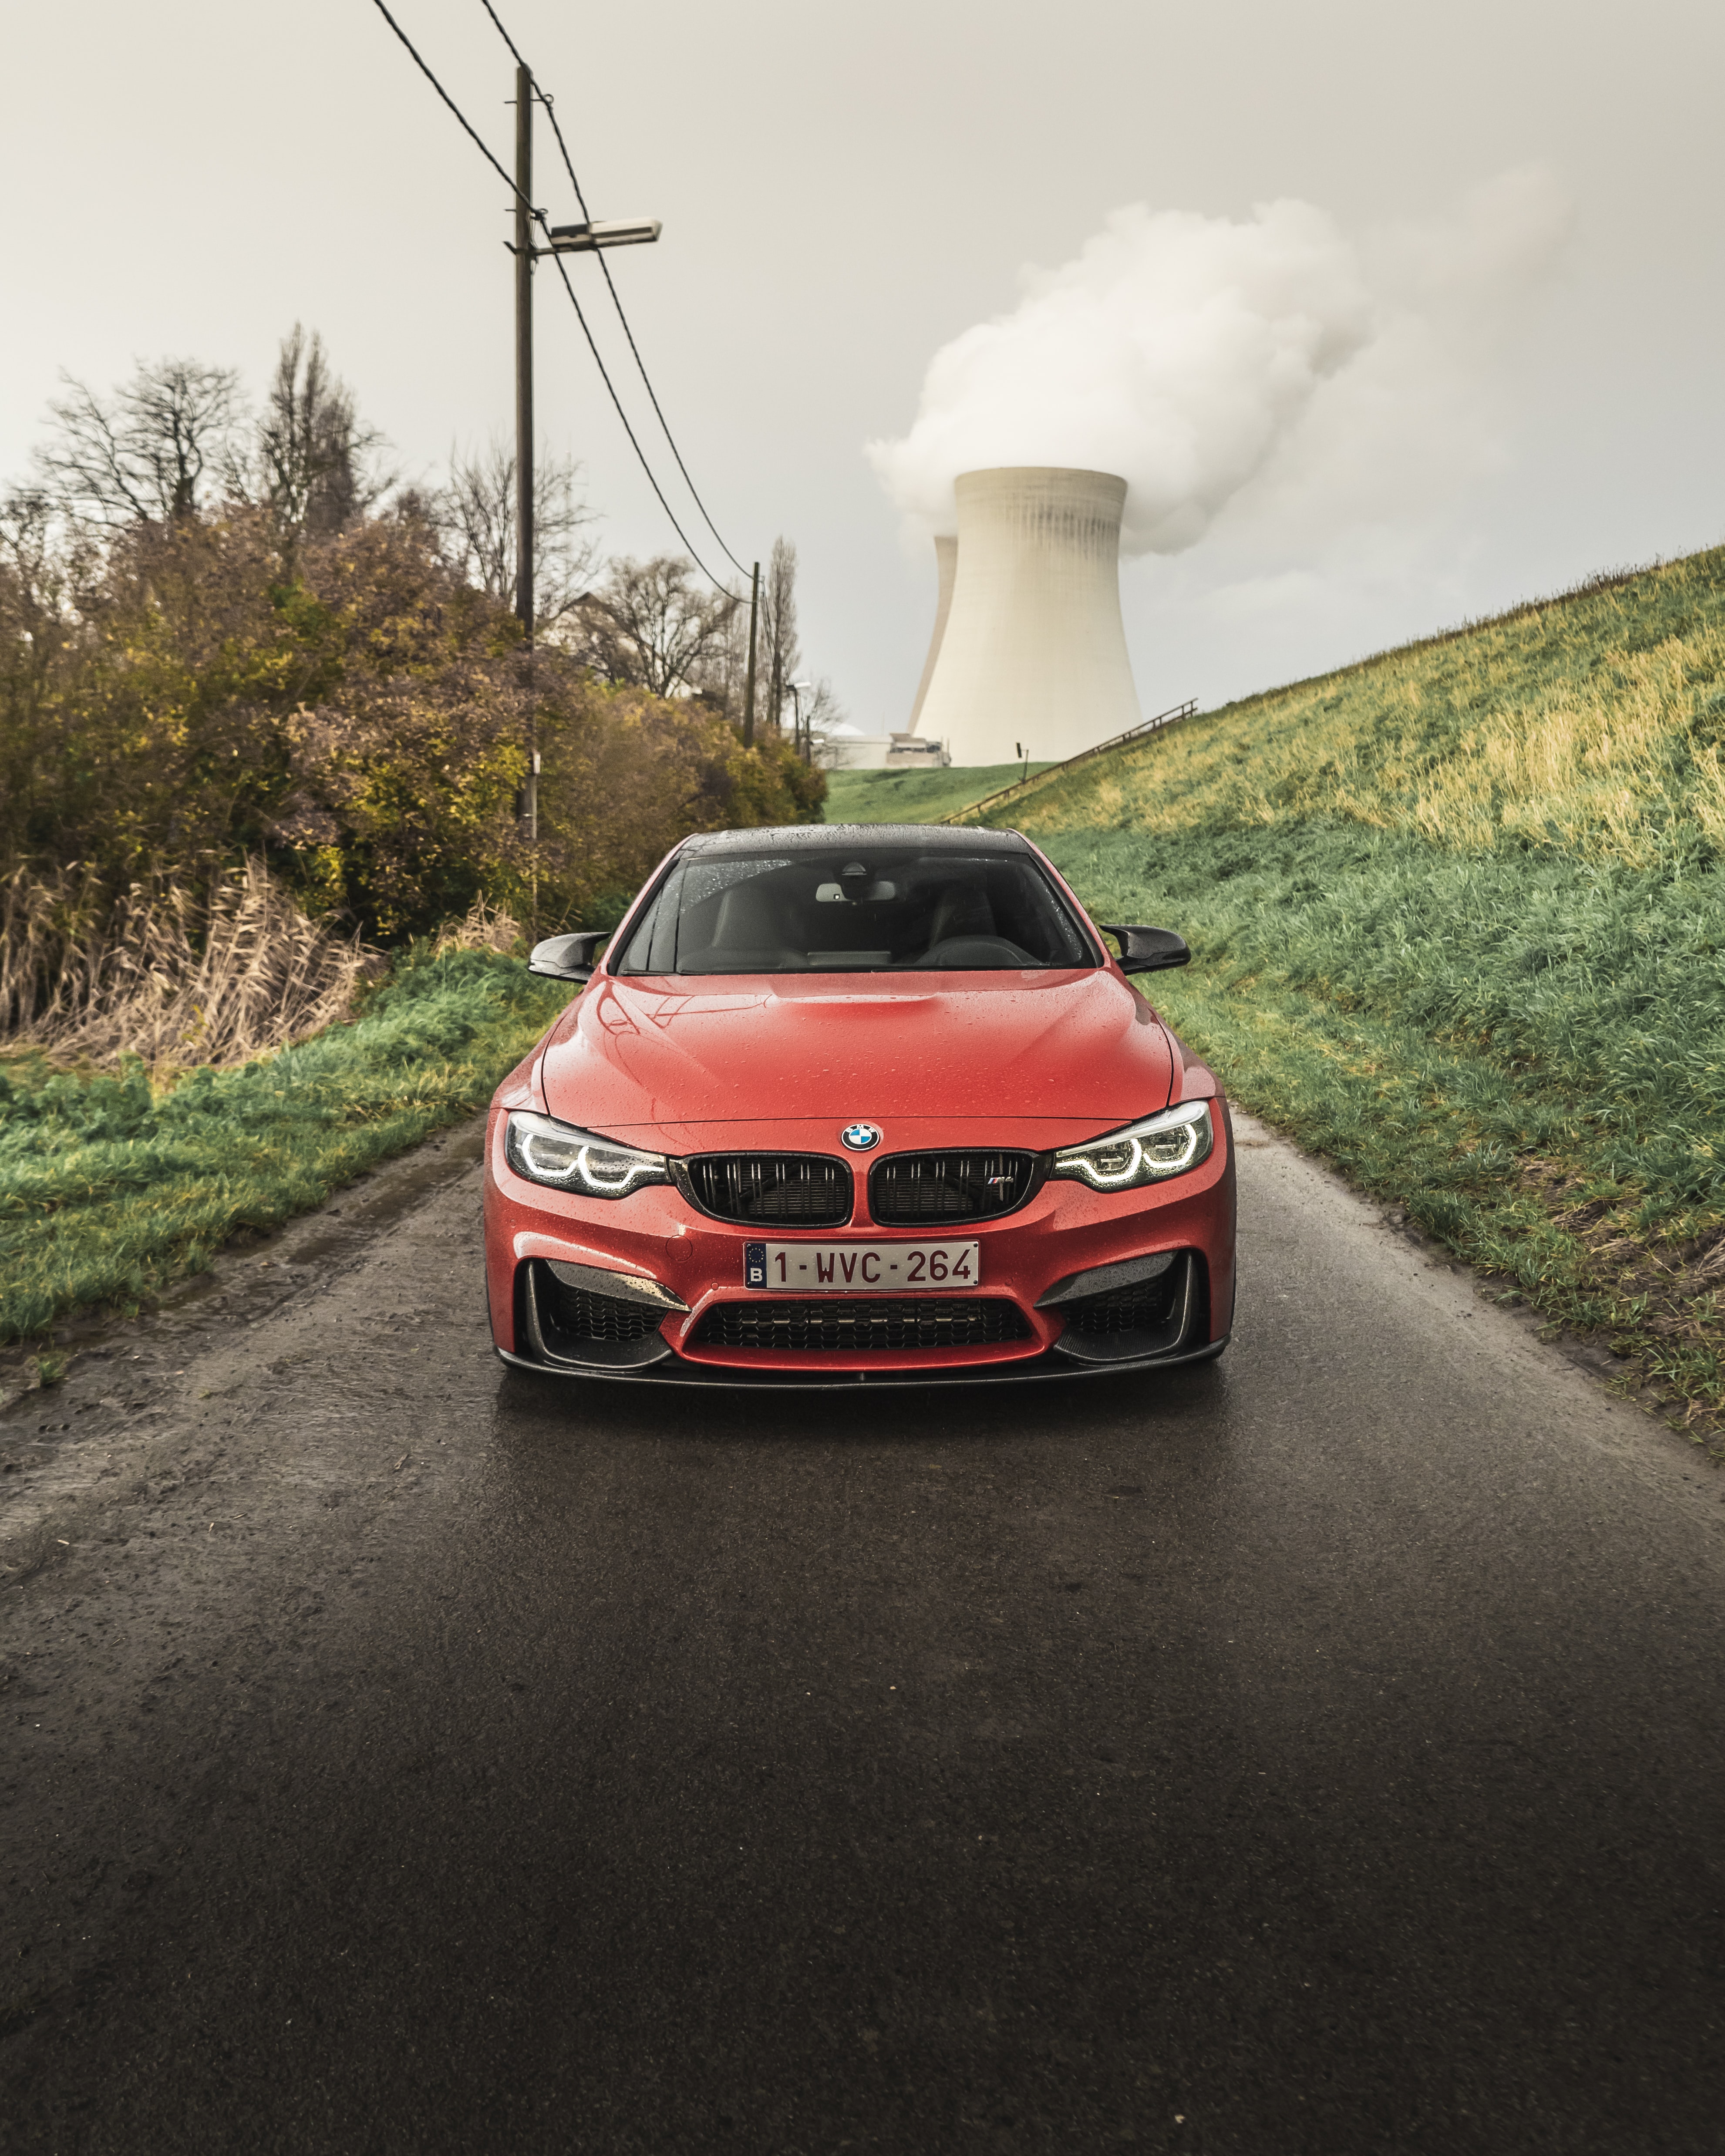 bmw, cars, red, car, front view, bmw m4 HD wallpaper